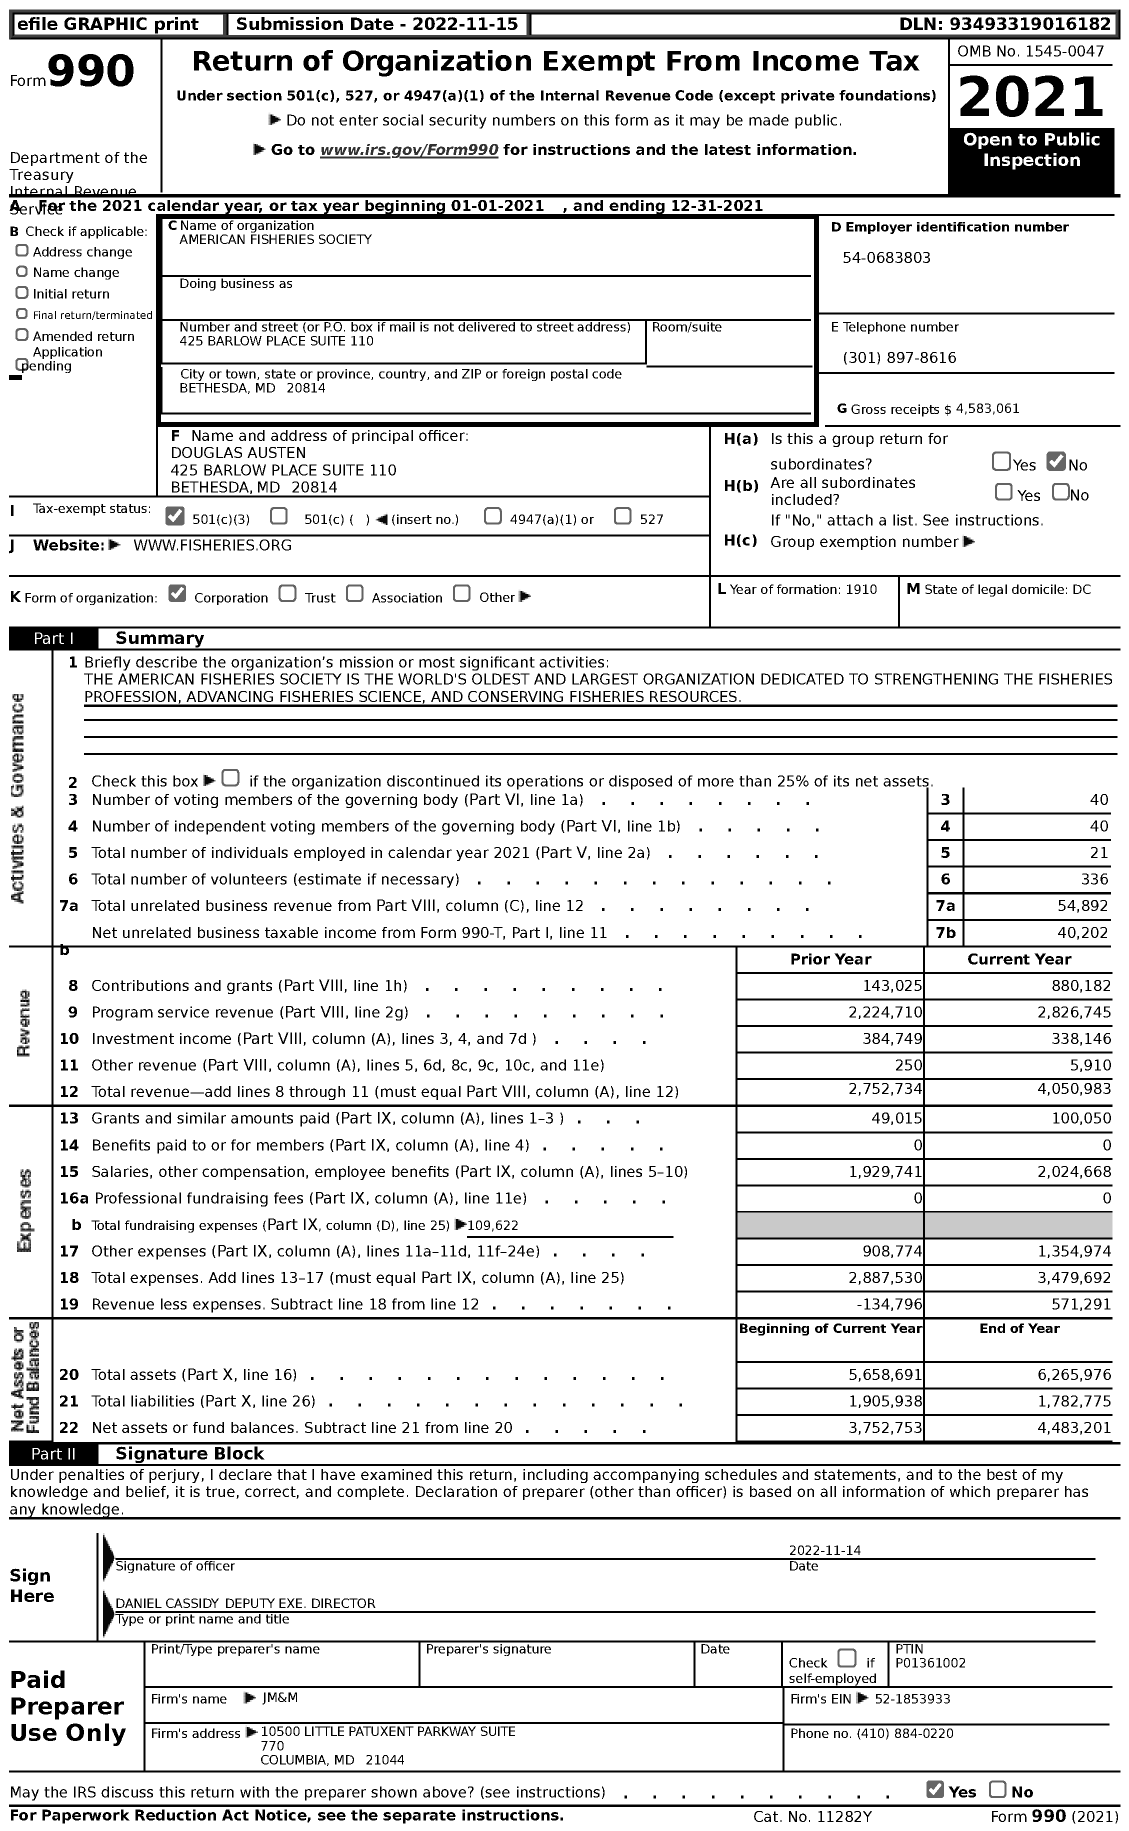 Image of first page of 2021 Form 990 for American Fisheries Society (AFS)